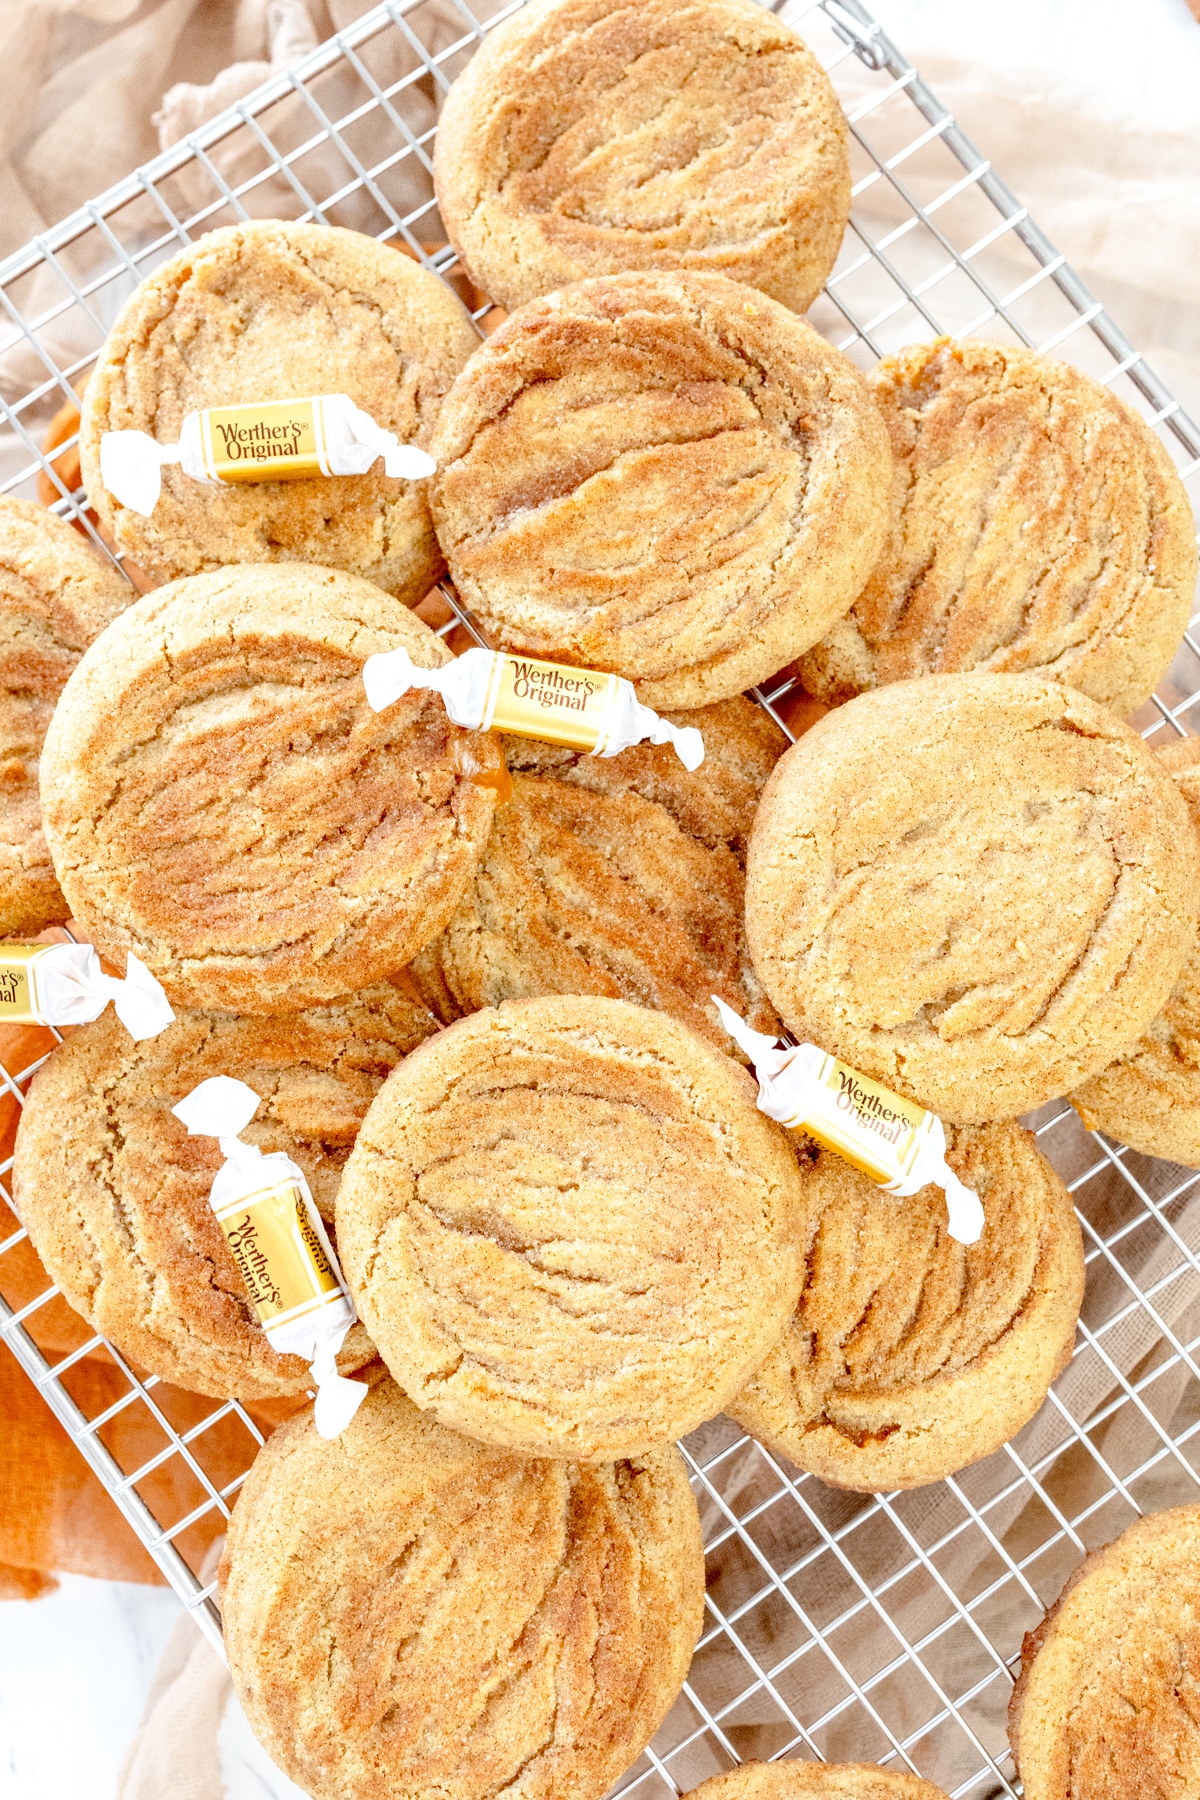 Top view of a pile of Caramel Snickerdoodle Cookies on a wire rack, with caramel candies interspersed throughout.